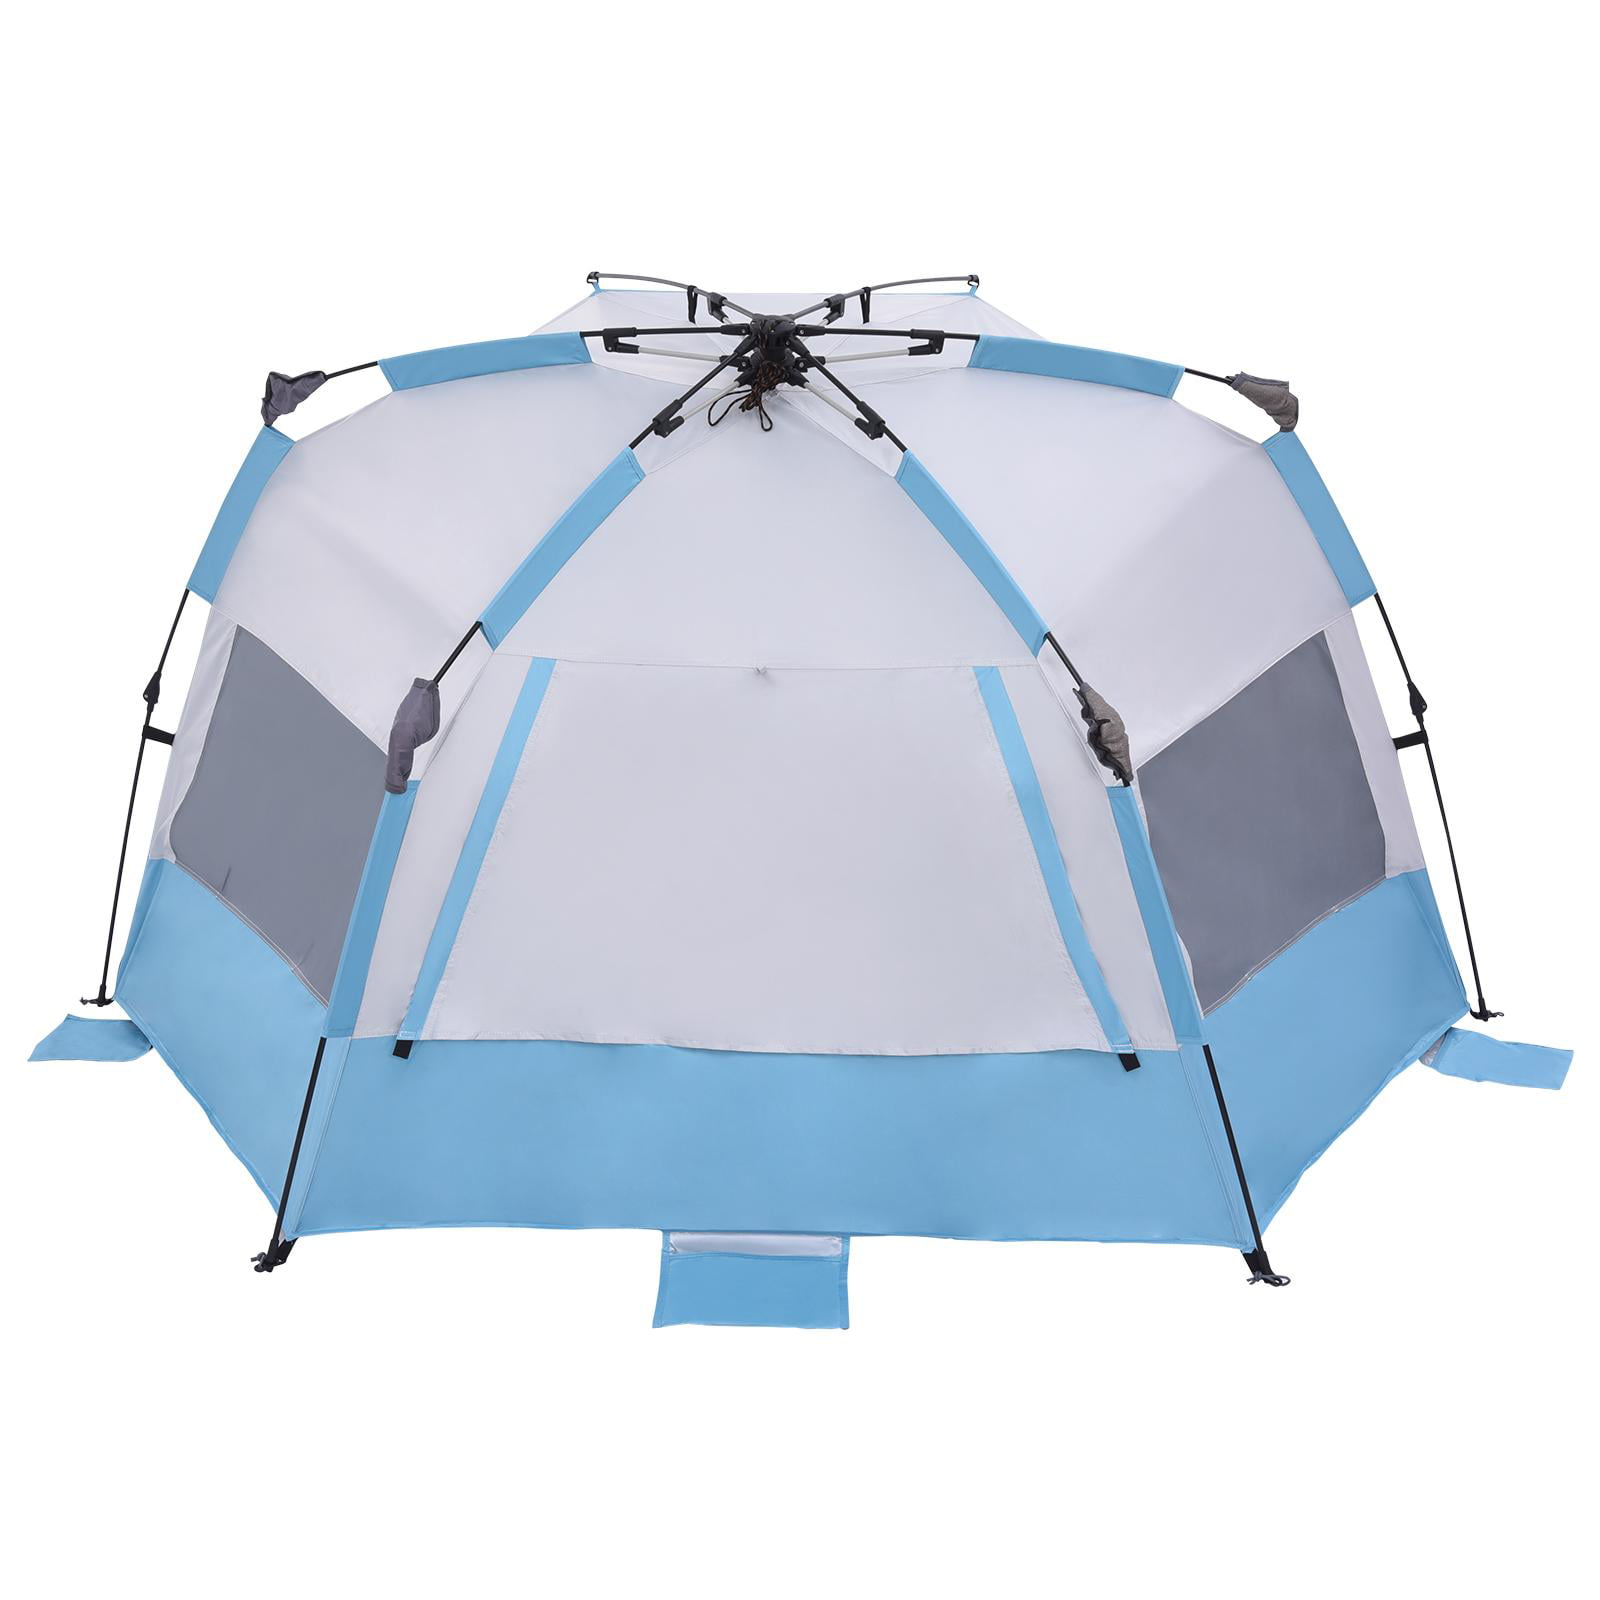 3-4 Person Waterproof Pop Up Family Camping Picnic Tent Beach Sun Shelter UK 